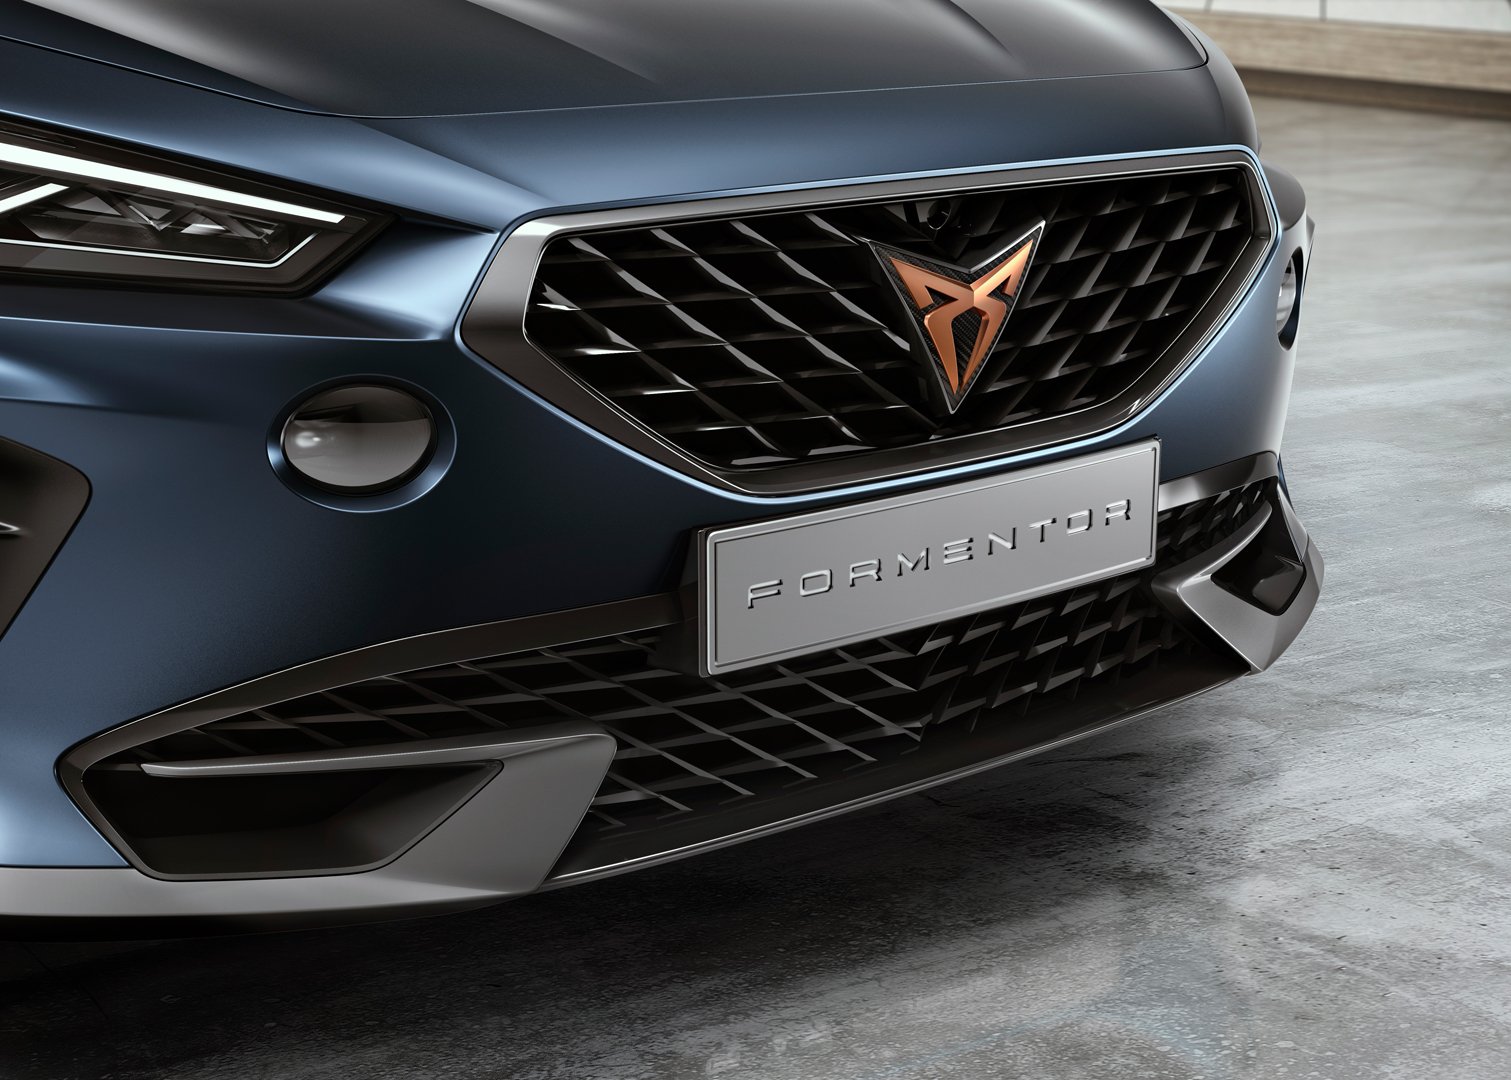 CGI Teaser images produced for the new Cupra Formentor presentation.